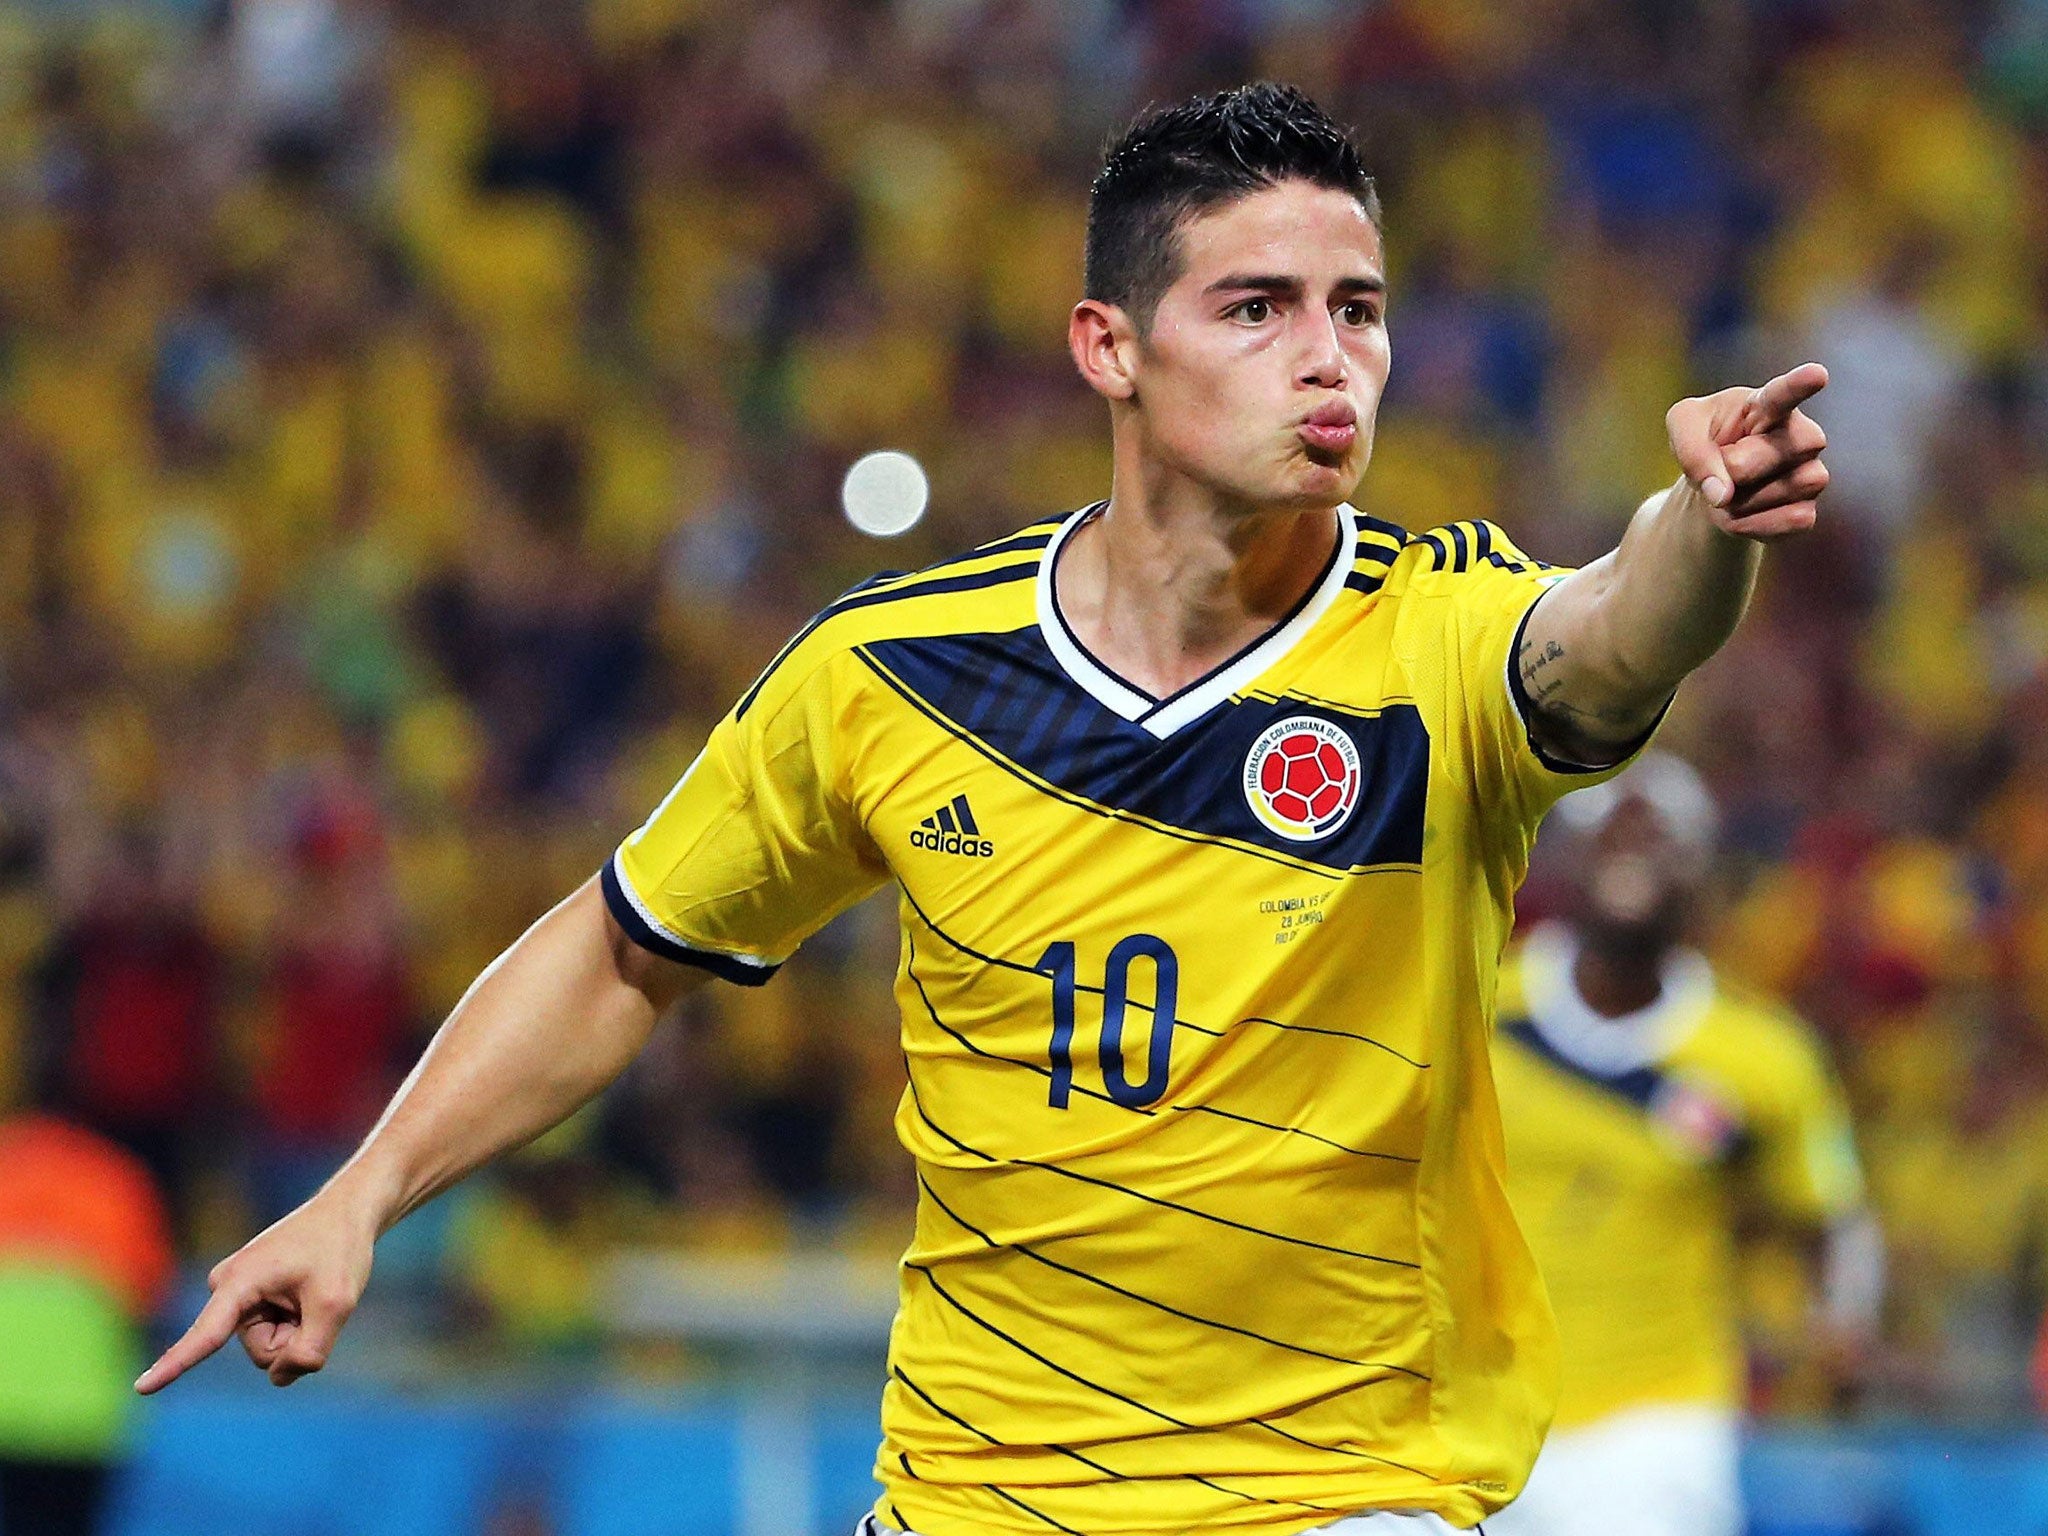 Colombia's James Rodriguez celebrates one of his goals during the FIFA World Cup 2014 round of 16 match between Colombia and Uruguay at the Estadio do Maracana in Rio de Janeiro, Brazil